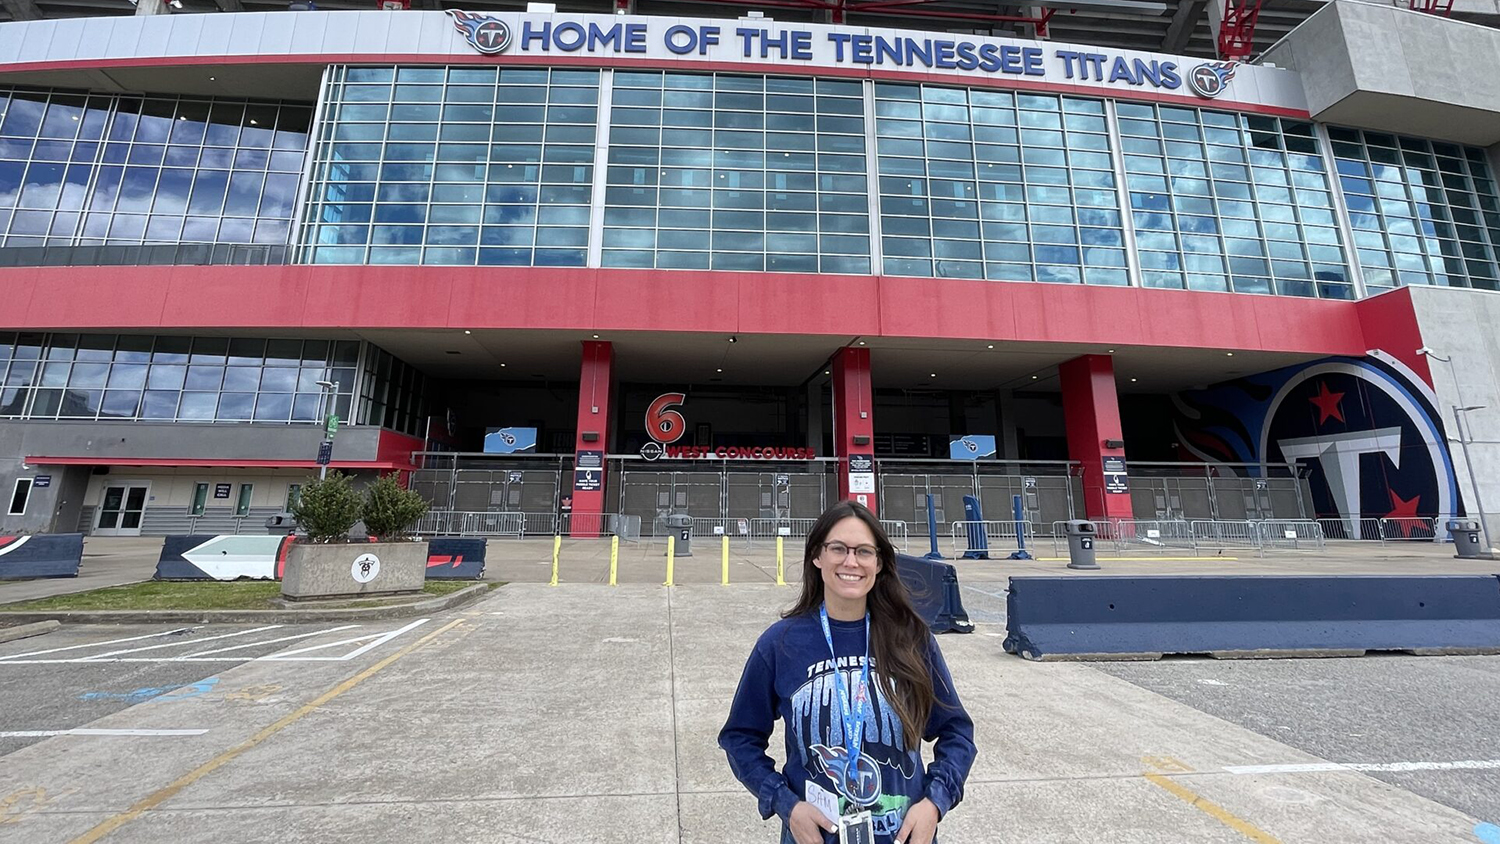 Sam Fischer poses outside of the Tennessee Titans stadium.